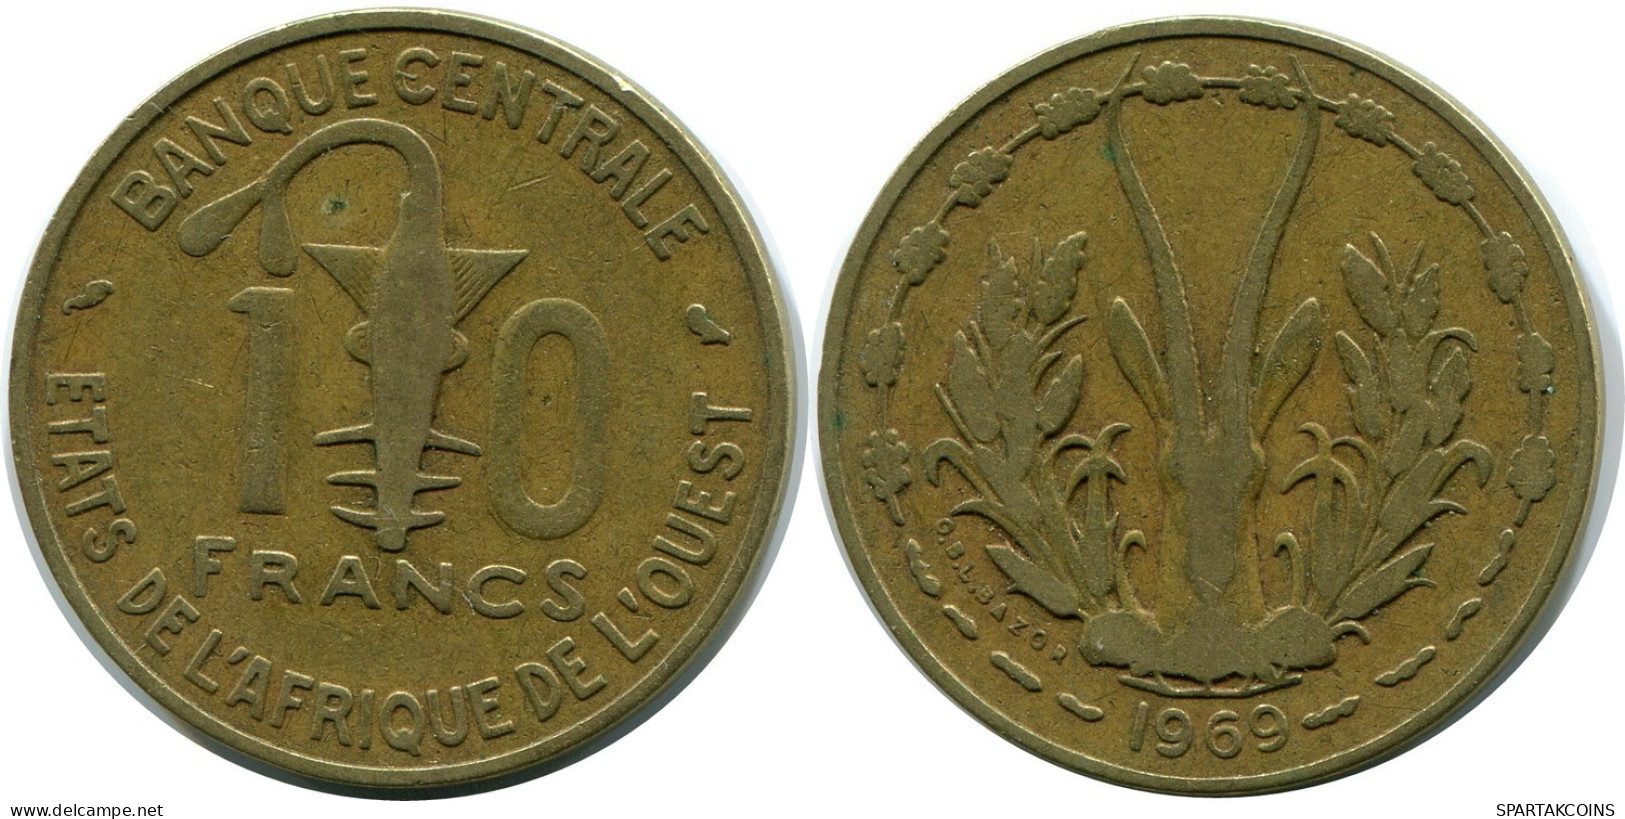 10 FRANCS CFA 1969 WESTERN AFRICAN STATES (BCEAO) Pièce #AR857.F.A - Other - Africa